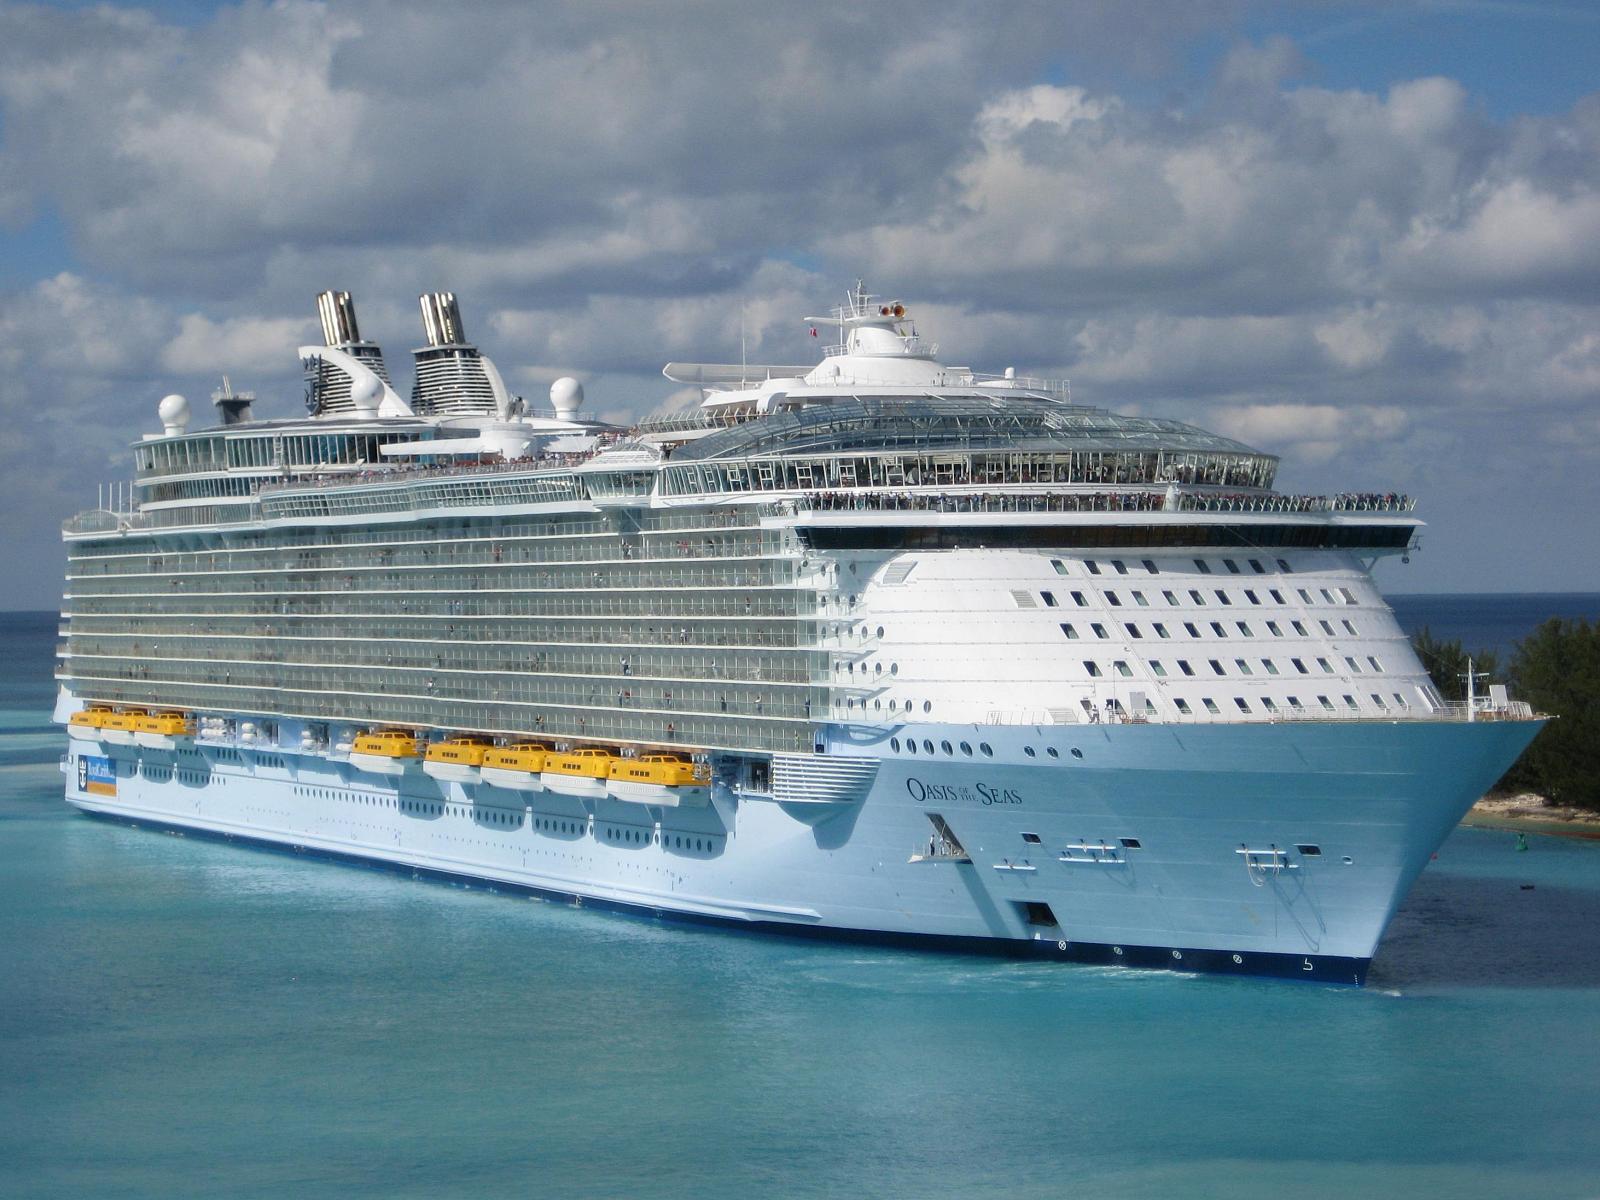 MS Oasis of the Seas Arena Pile Top 10 Biggest Cruise Ships Royal Caribbean In The World